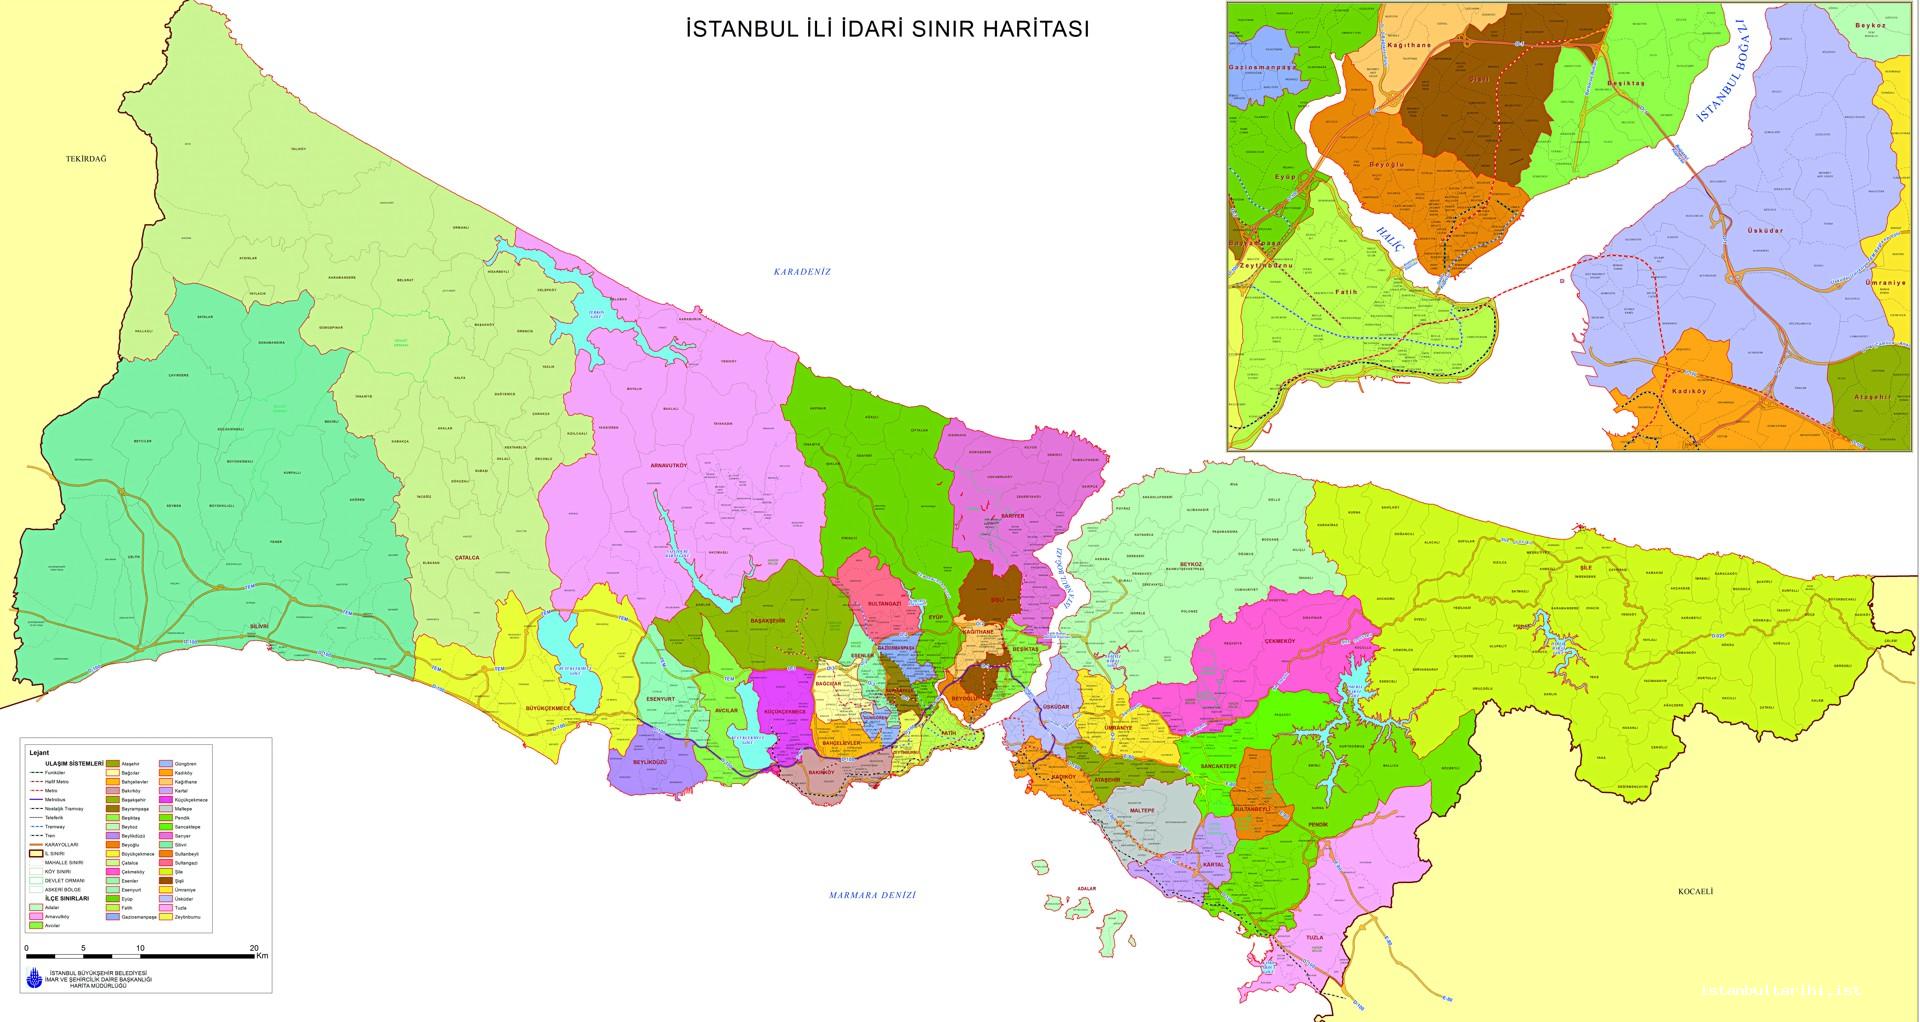 Map 6- The areas of responsibility of Istanbul Metropolitan Municipality between 2008-2014 according to Law no. 5747 (Istanbul Metropolitan Municipality)